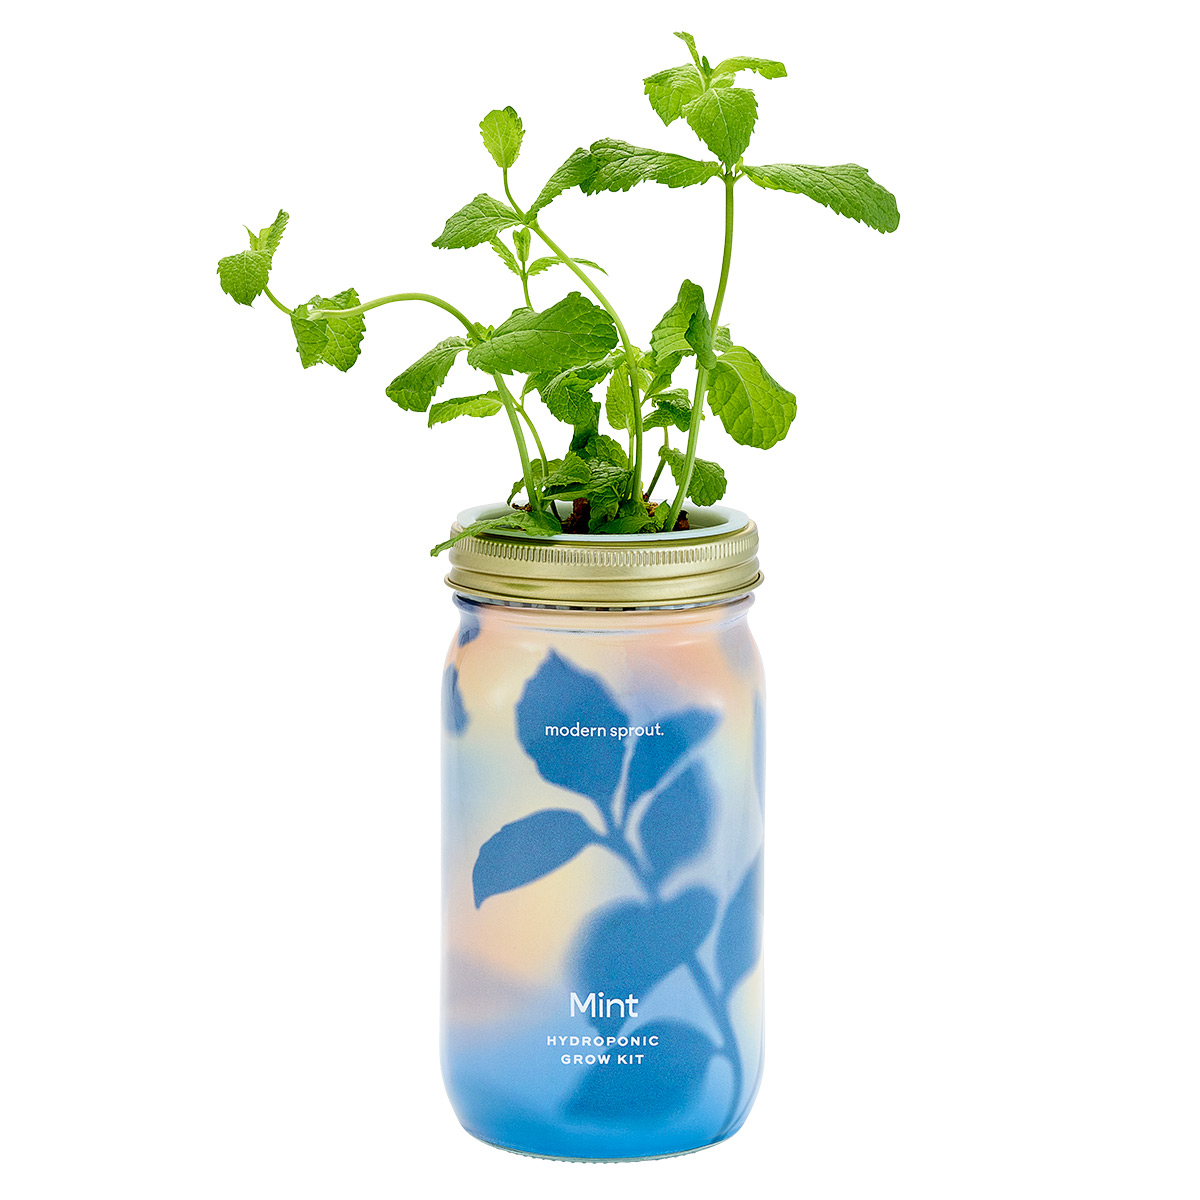 Modern Sprout Organic Herbs Garden Jar | The Container Store